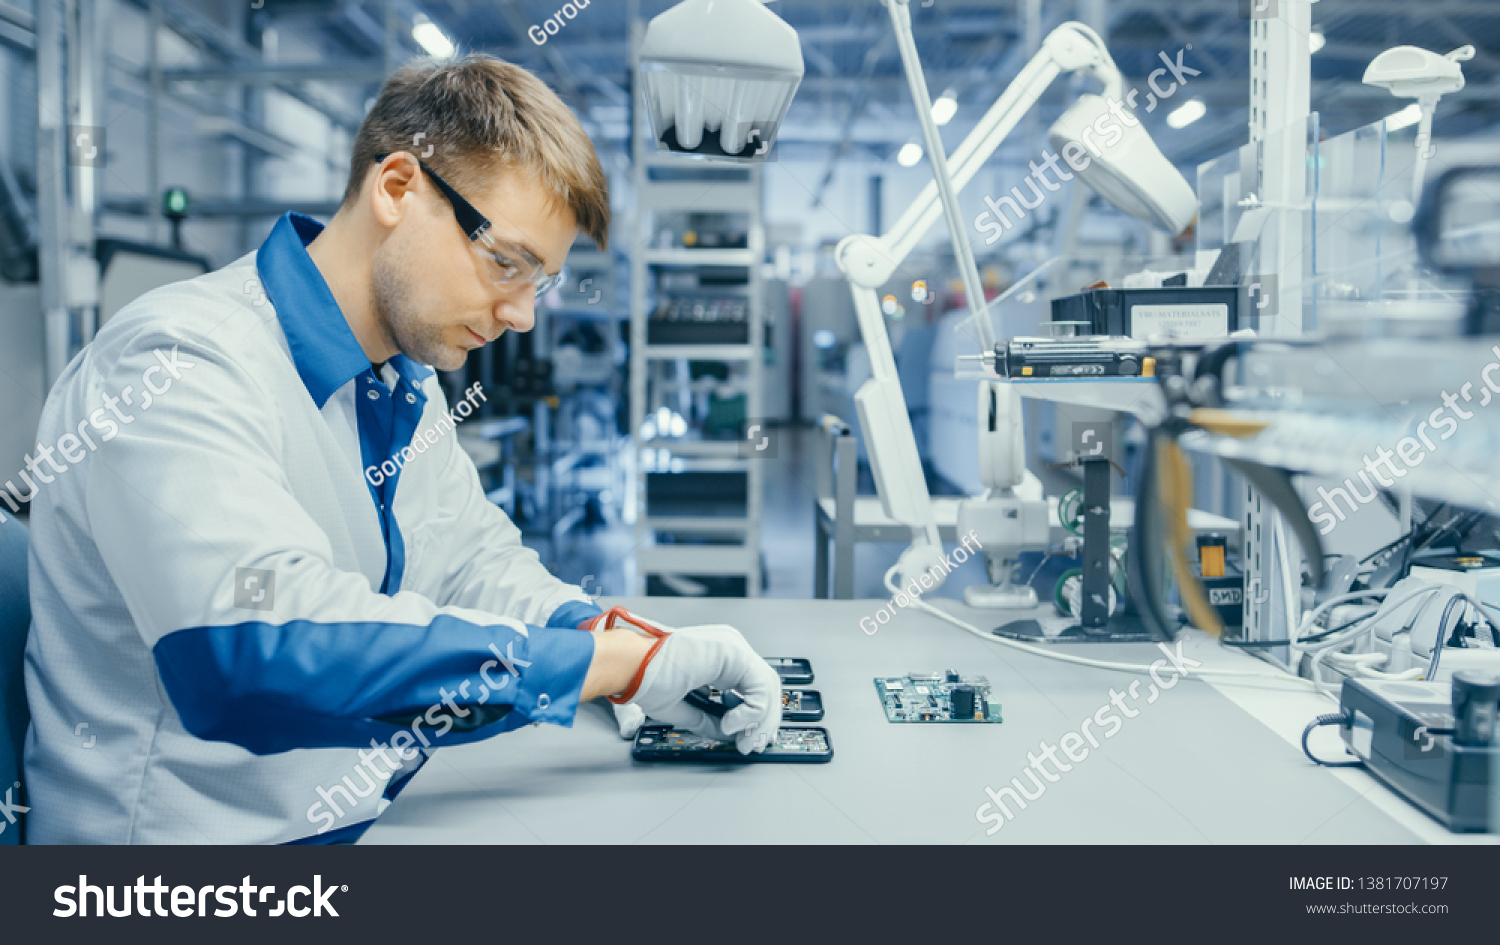 Young Man in Blue and White Work Coat is Using Plier to Assemble Printed Circuit Board for Smartphone. Electronics Factory Workers in a High Tech Factory Facility. #1381707197